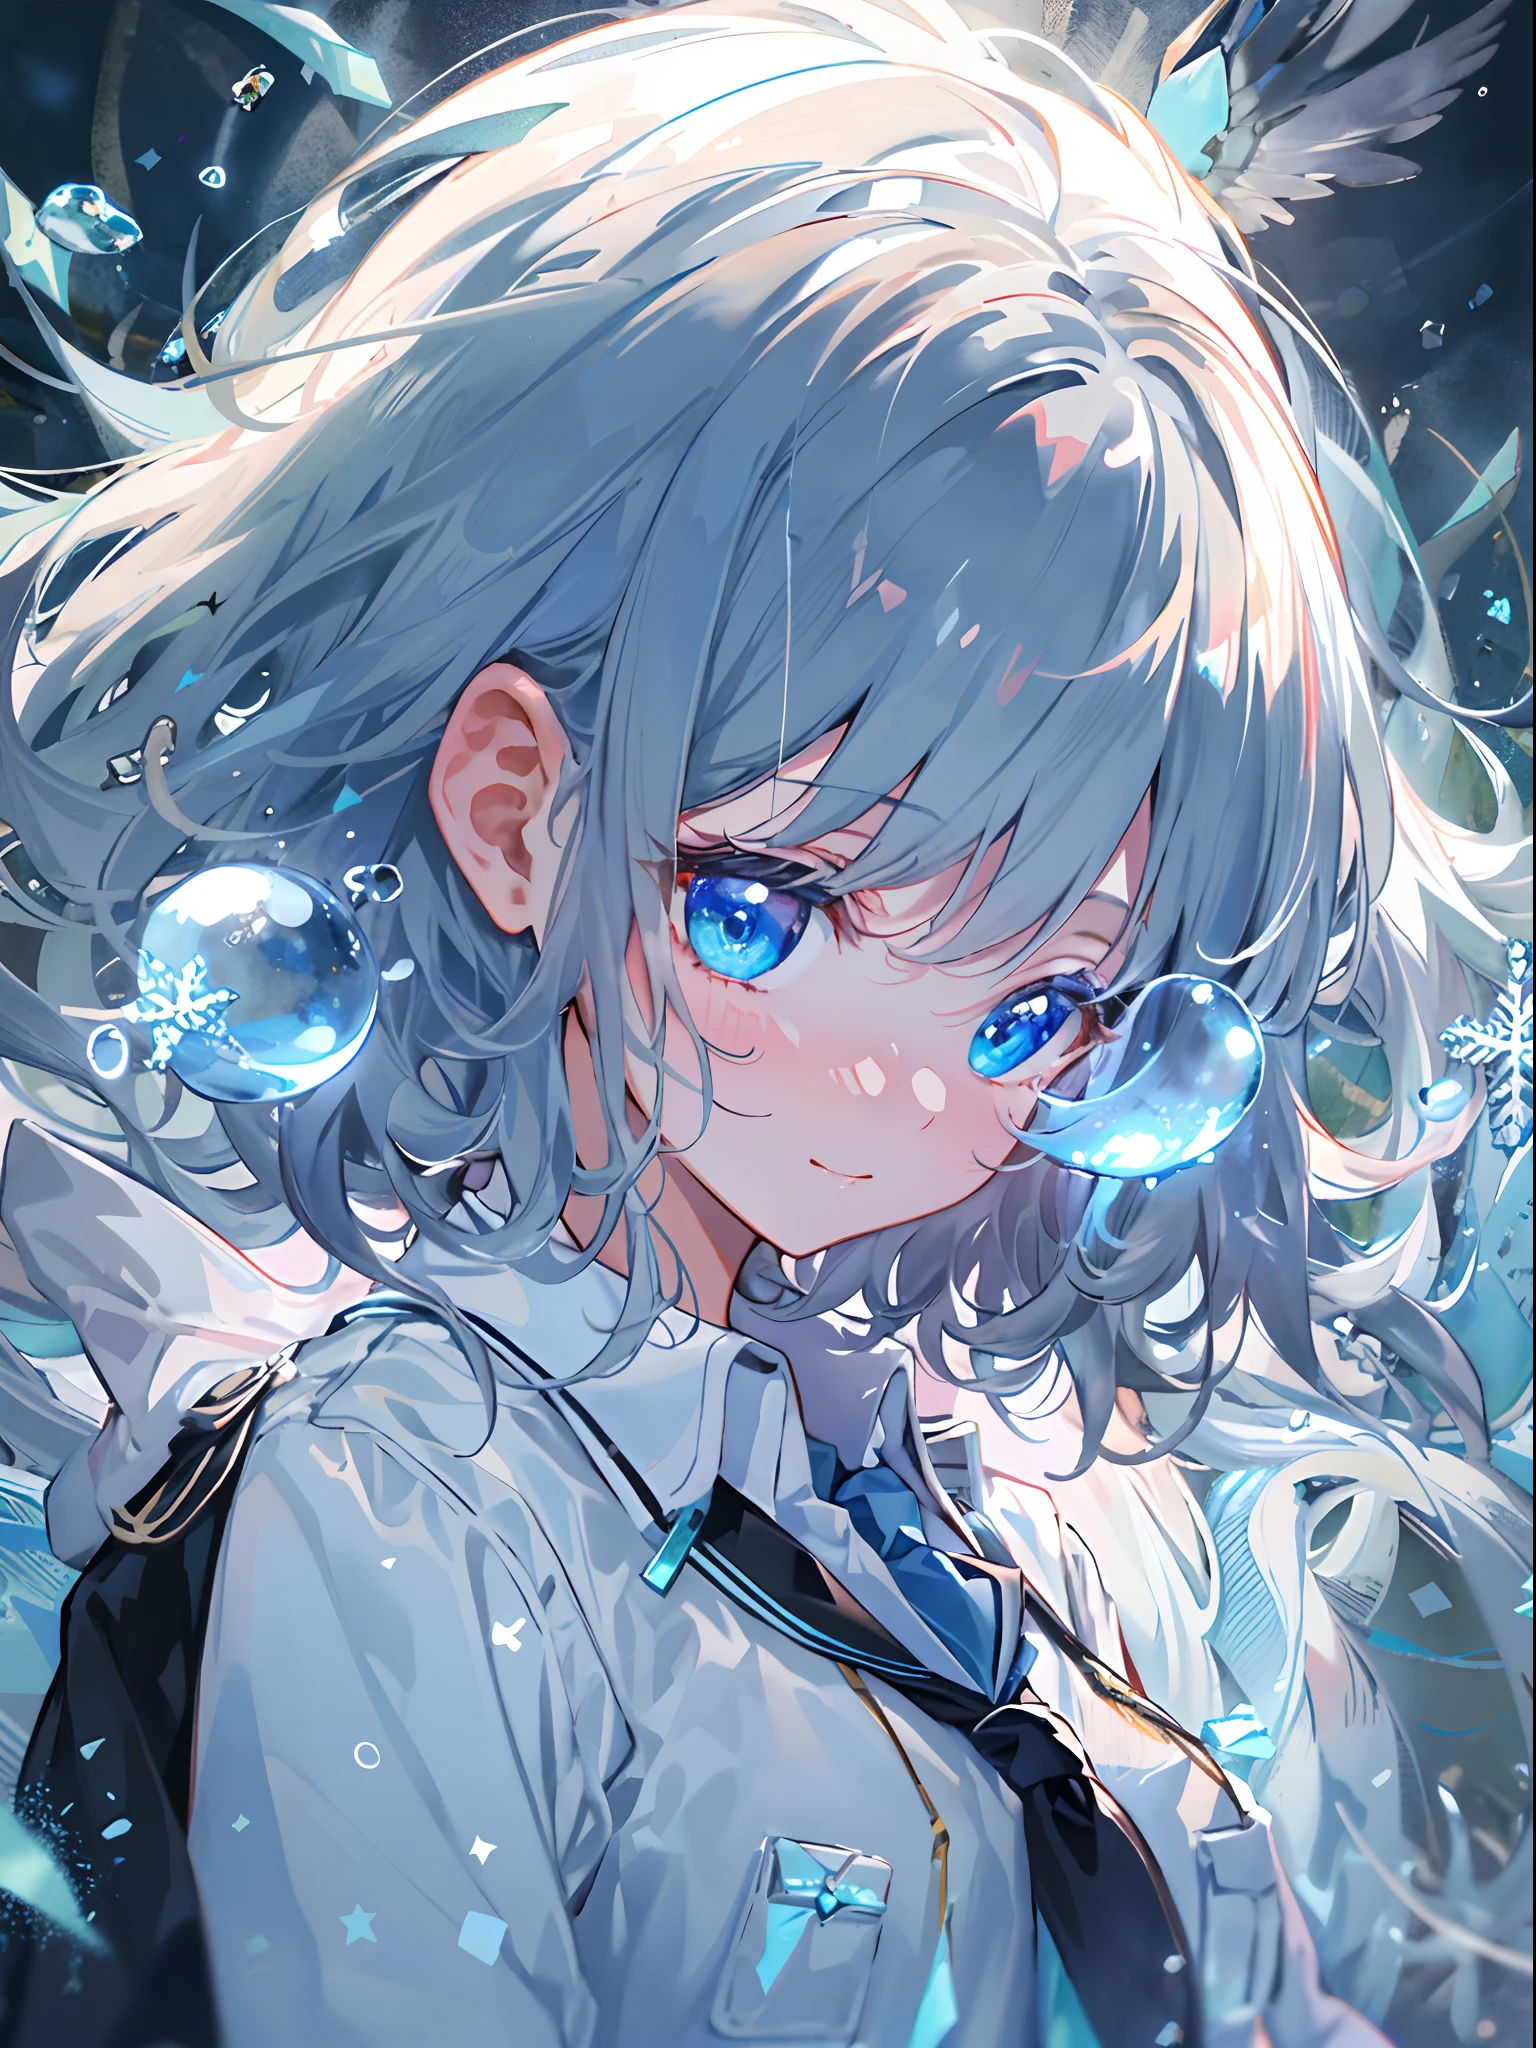 ((top-quality)), ((​masterpiece)), ((Ultra-detail)), (Extremely delicate and beautiful), girl with, solo, cold attitude,((Black jacket)),She is very(relax)with  the(Settled down)Looks,A darK-haired, depth of fields,Evil smile,Bubble, under the water, Air bubble,bright light blue eyes,inner color with bright gray hair and light blue tips,,,,,,Cold background,Bob Hair - Linear Art, shortpants、knee high socks、White uniform like 、Light blue ribbon ties、Clothes are sheer、Hands in pockets、Bright eyes like sapphire,Fronllesse Blue, A small blue light was floating、Upper Eyes、glass shards、Snowflake patterned eyes、Fantastic eyes